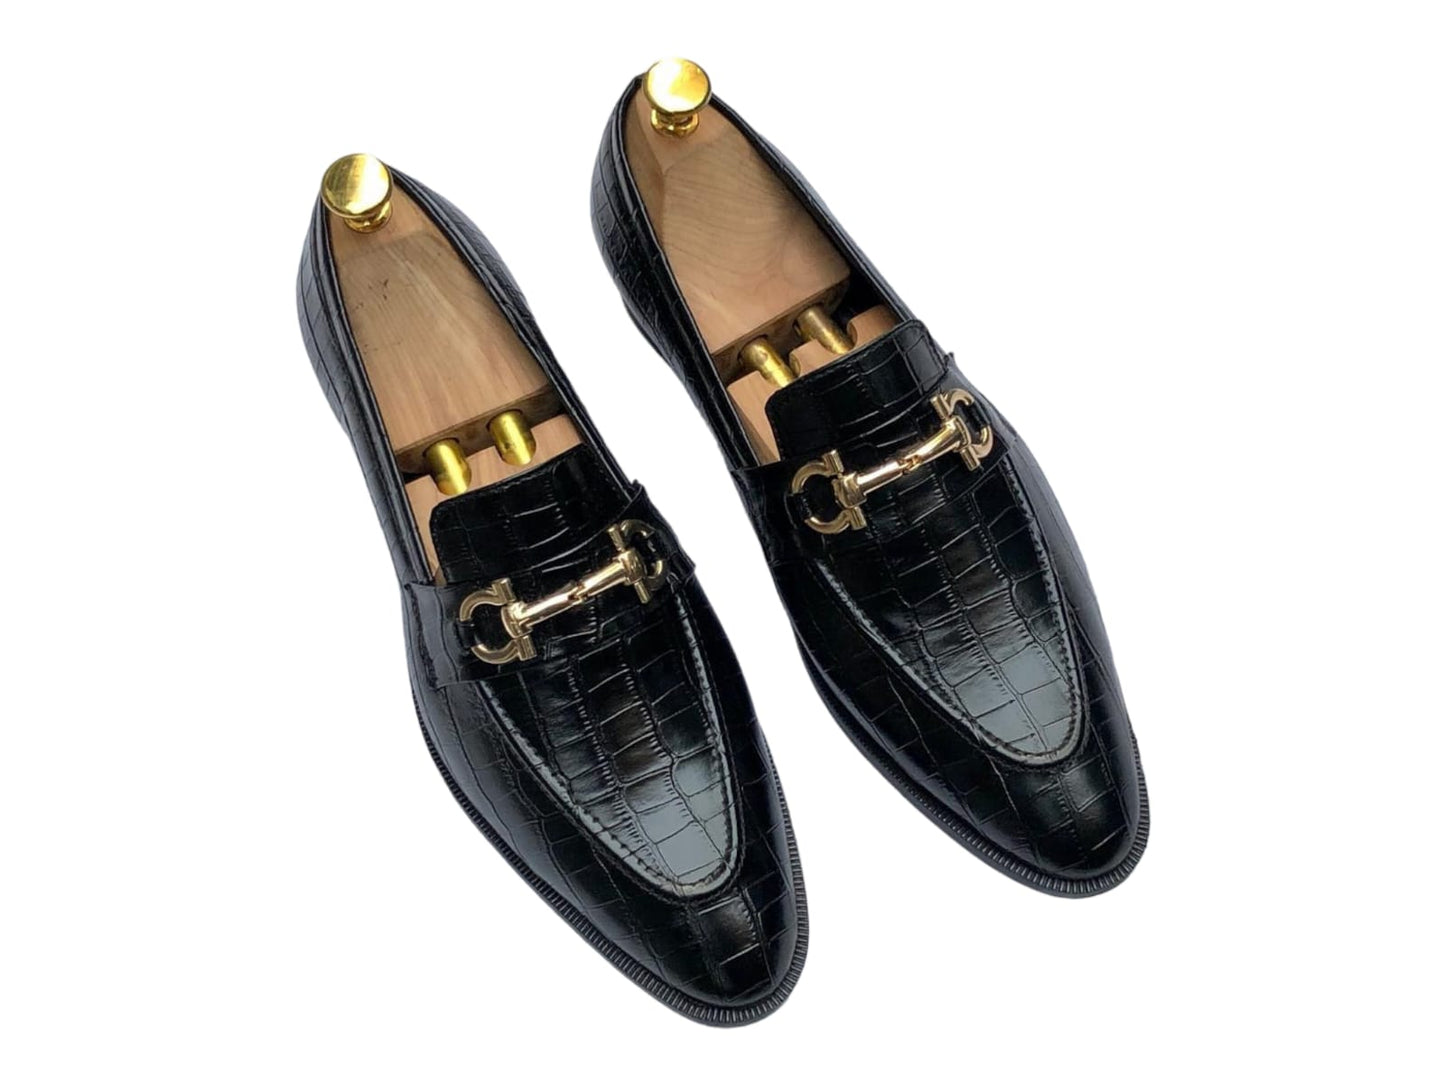 Buy New Black Croco Design Semi formal loafers for Men with Durable sole-Jack Marc